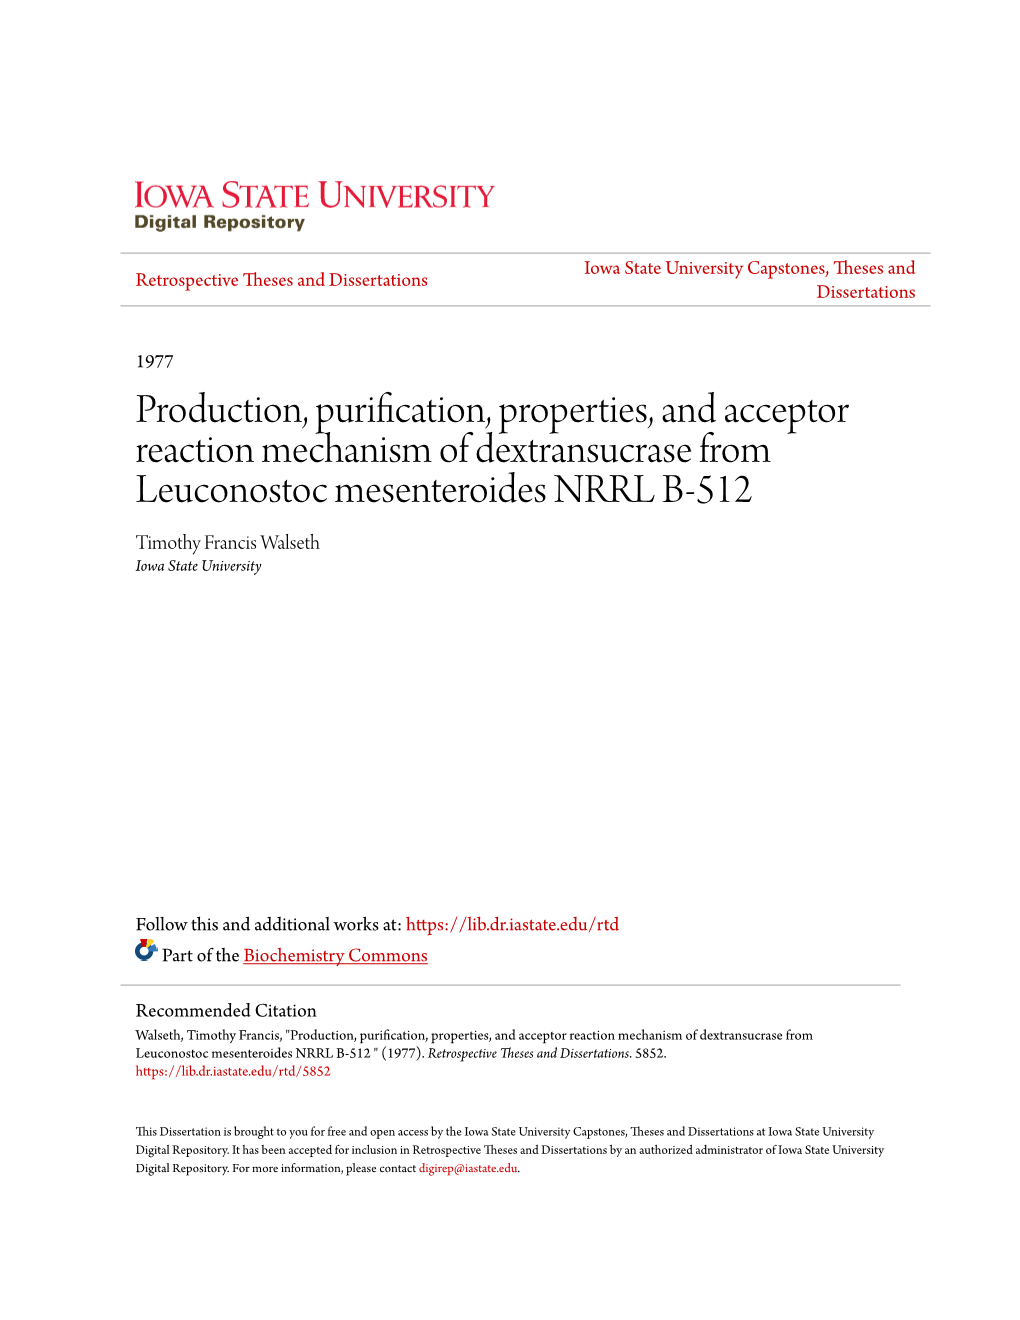 Production, Purification, Properties, and Acceptor Reaction Mechanism of Dextransucrase from Leuconostoc Mesenteroides NRRL B-51